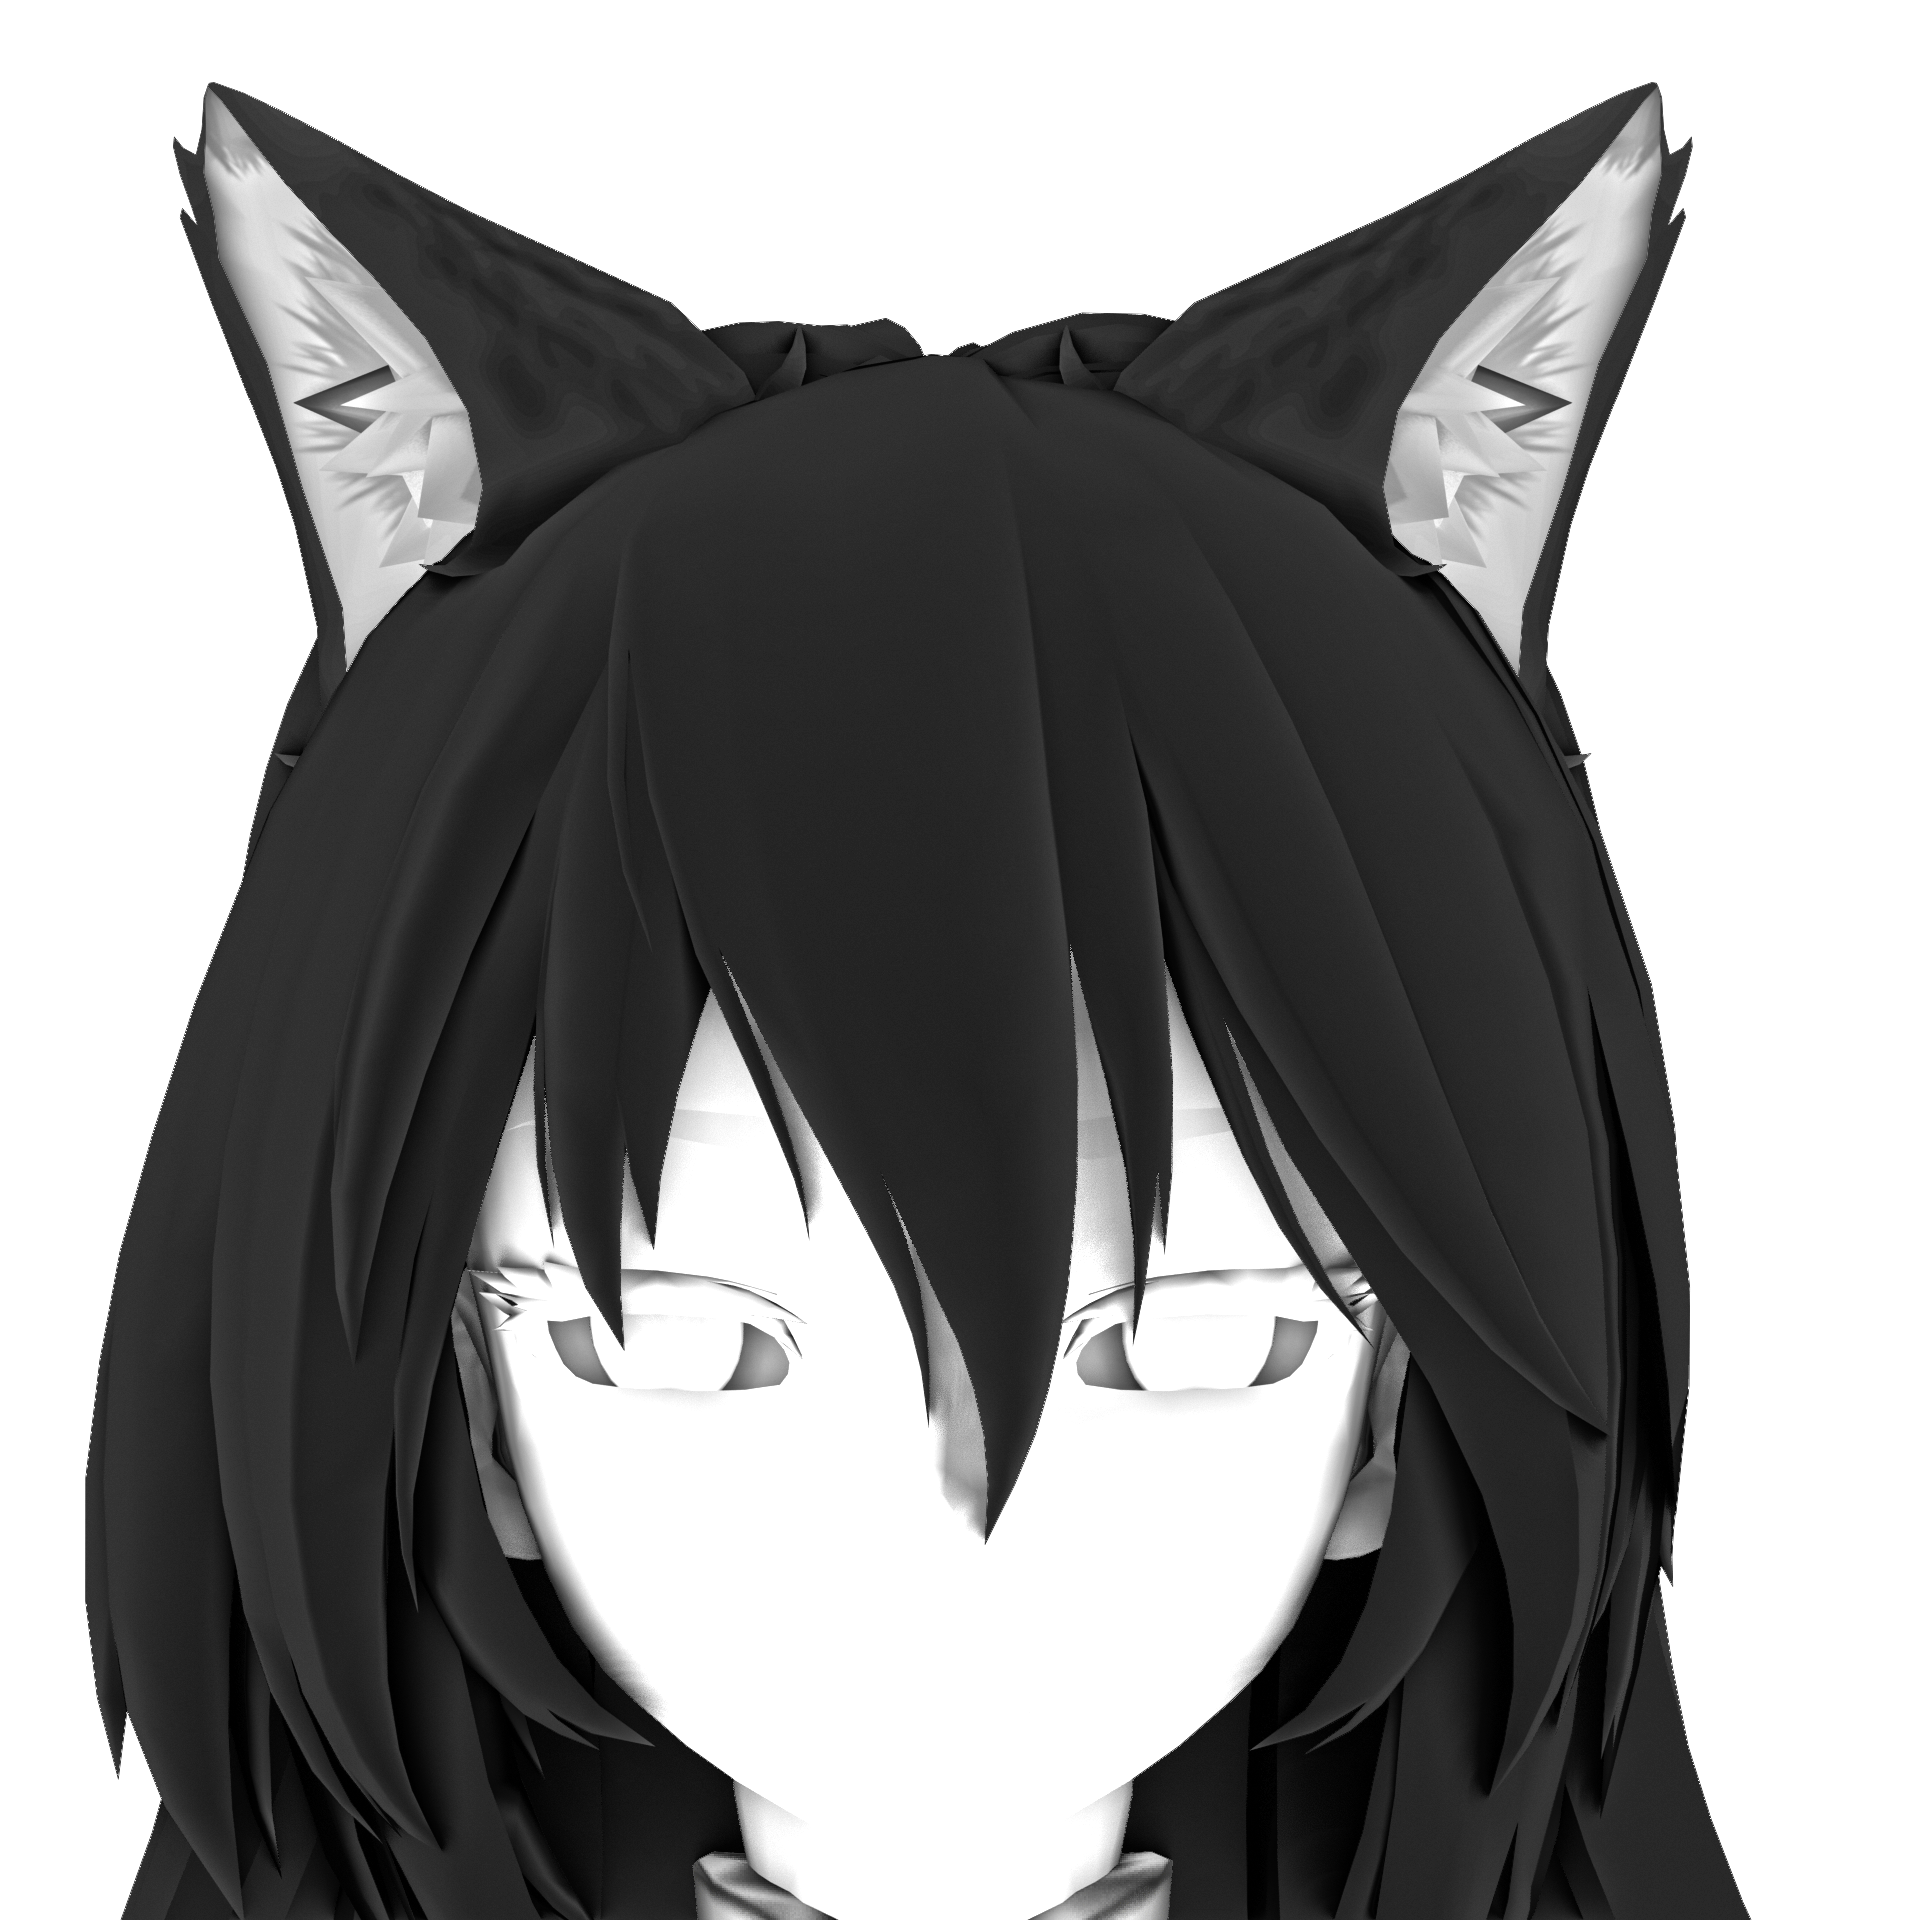 Cat ears - Download by HoloExe on DeviantArt